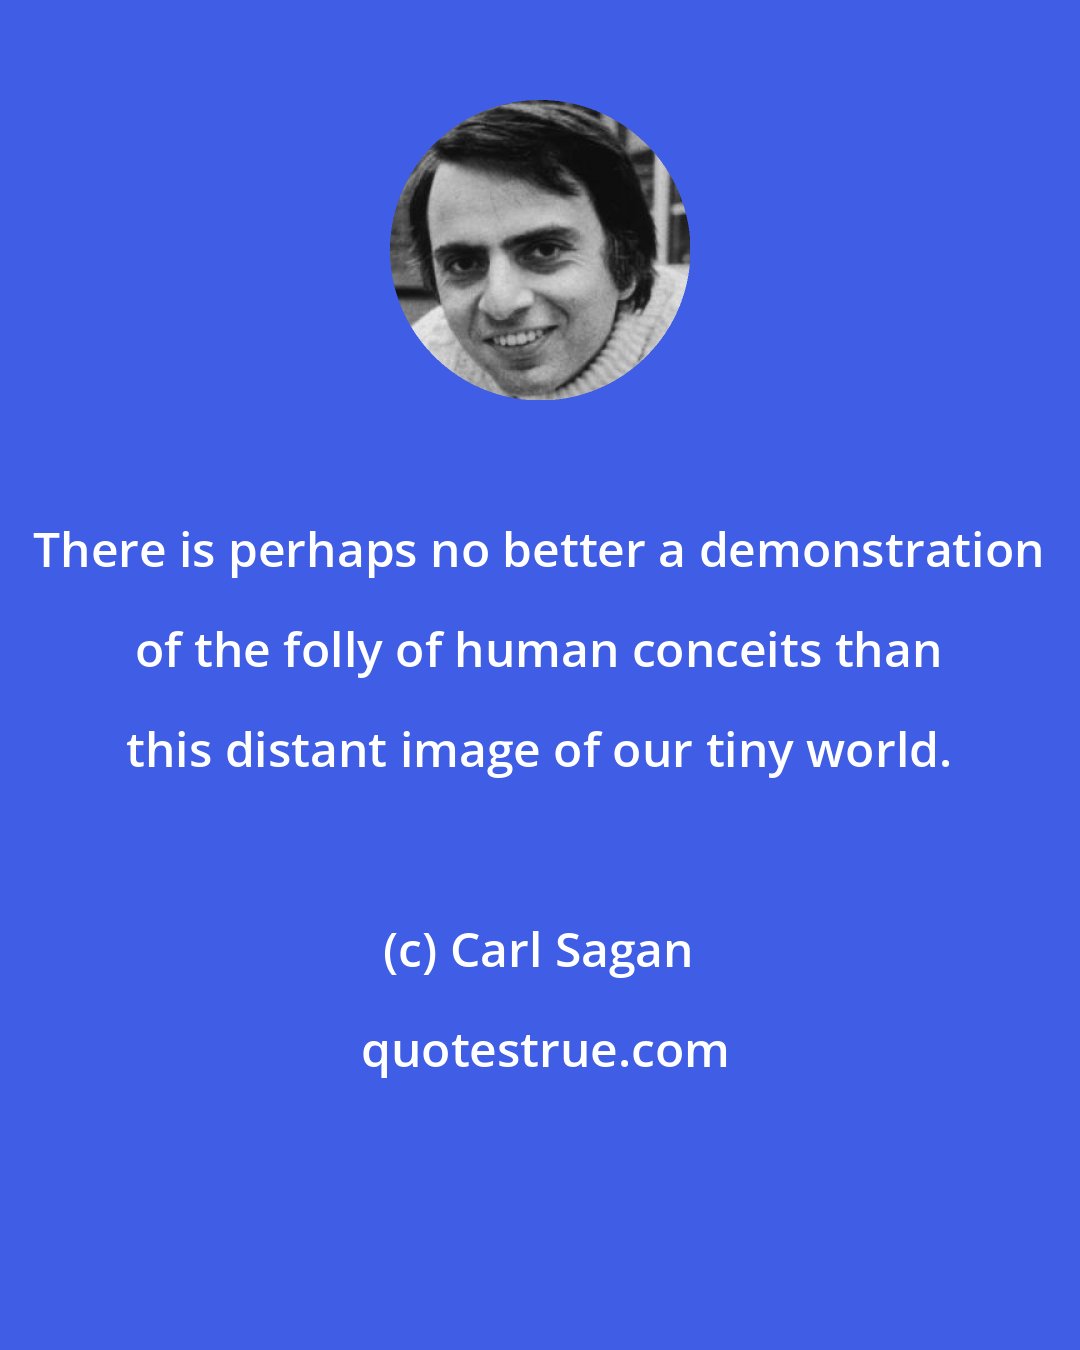 Carl Sagan: There is perhaps no better a demonstration of the folly of human conceits than this distant image of our tiny world.